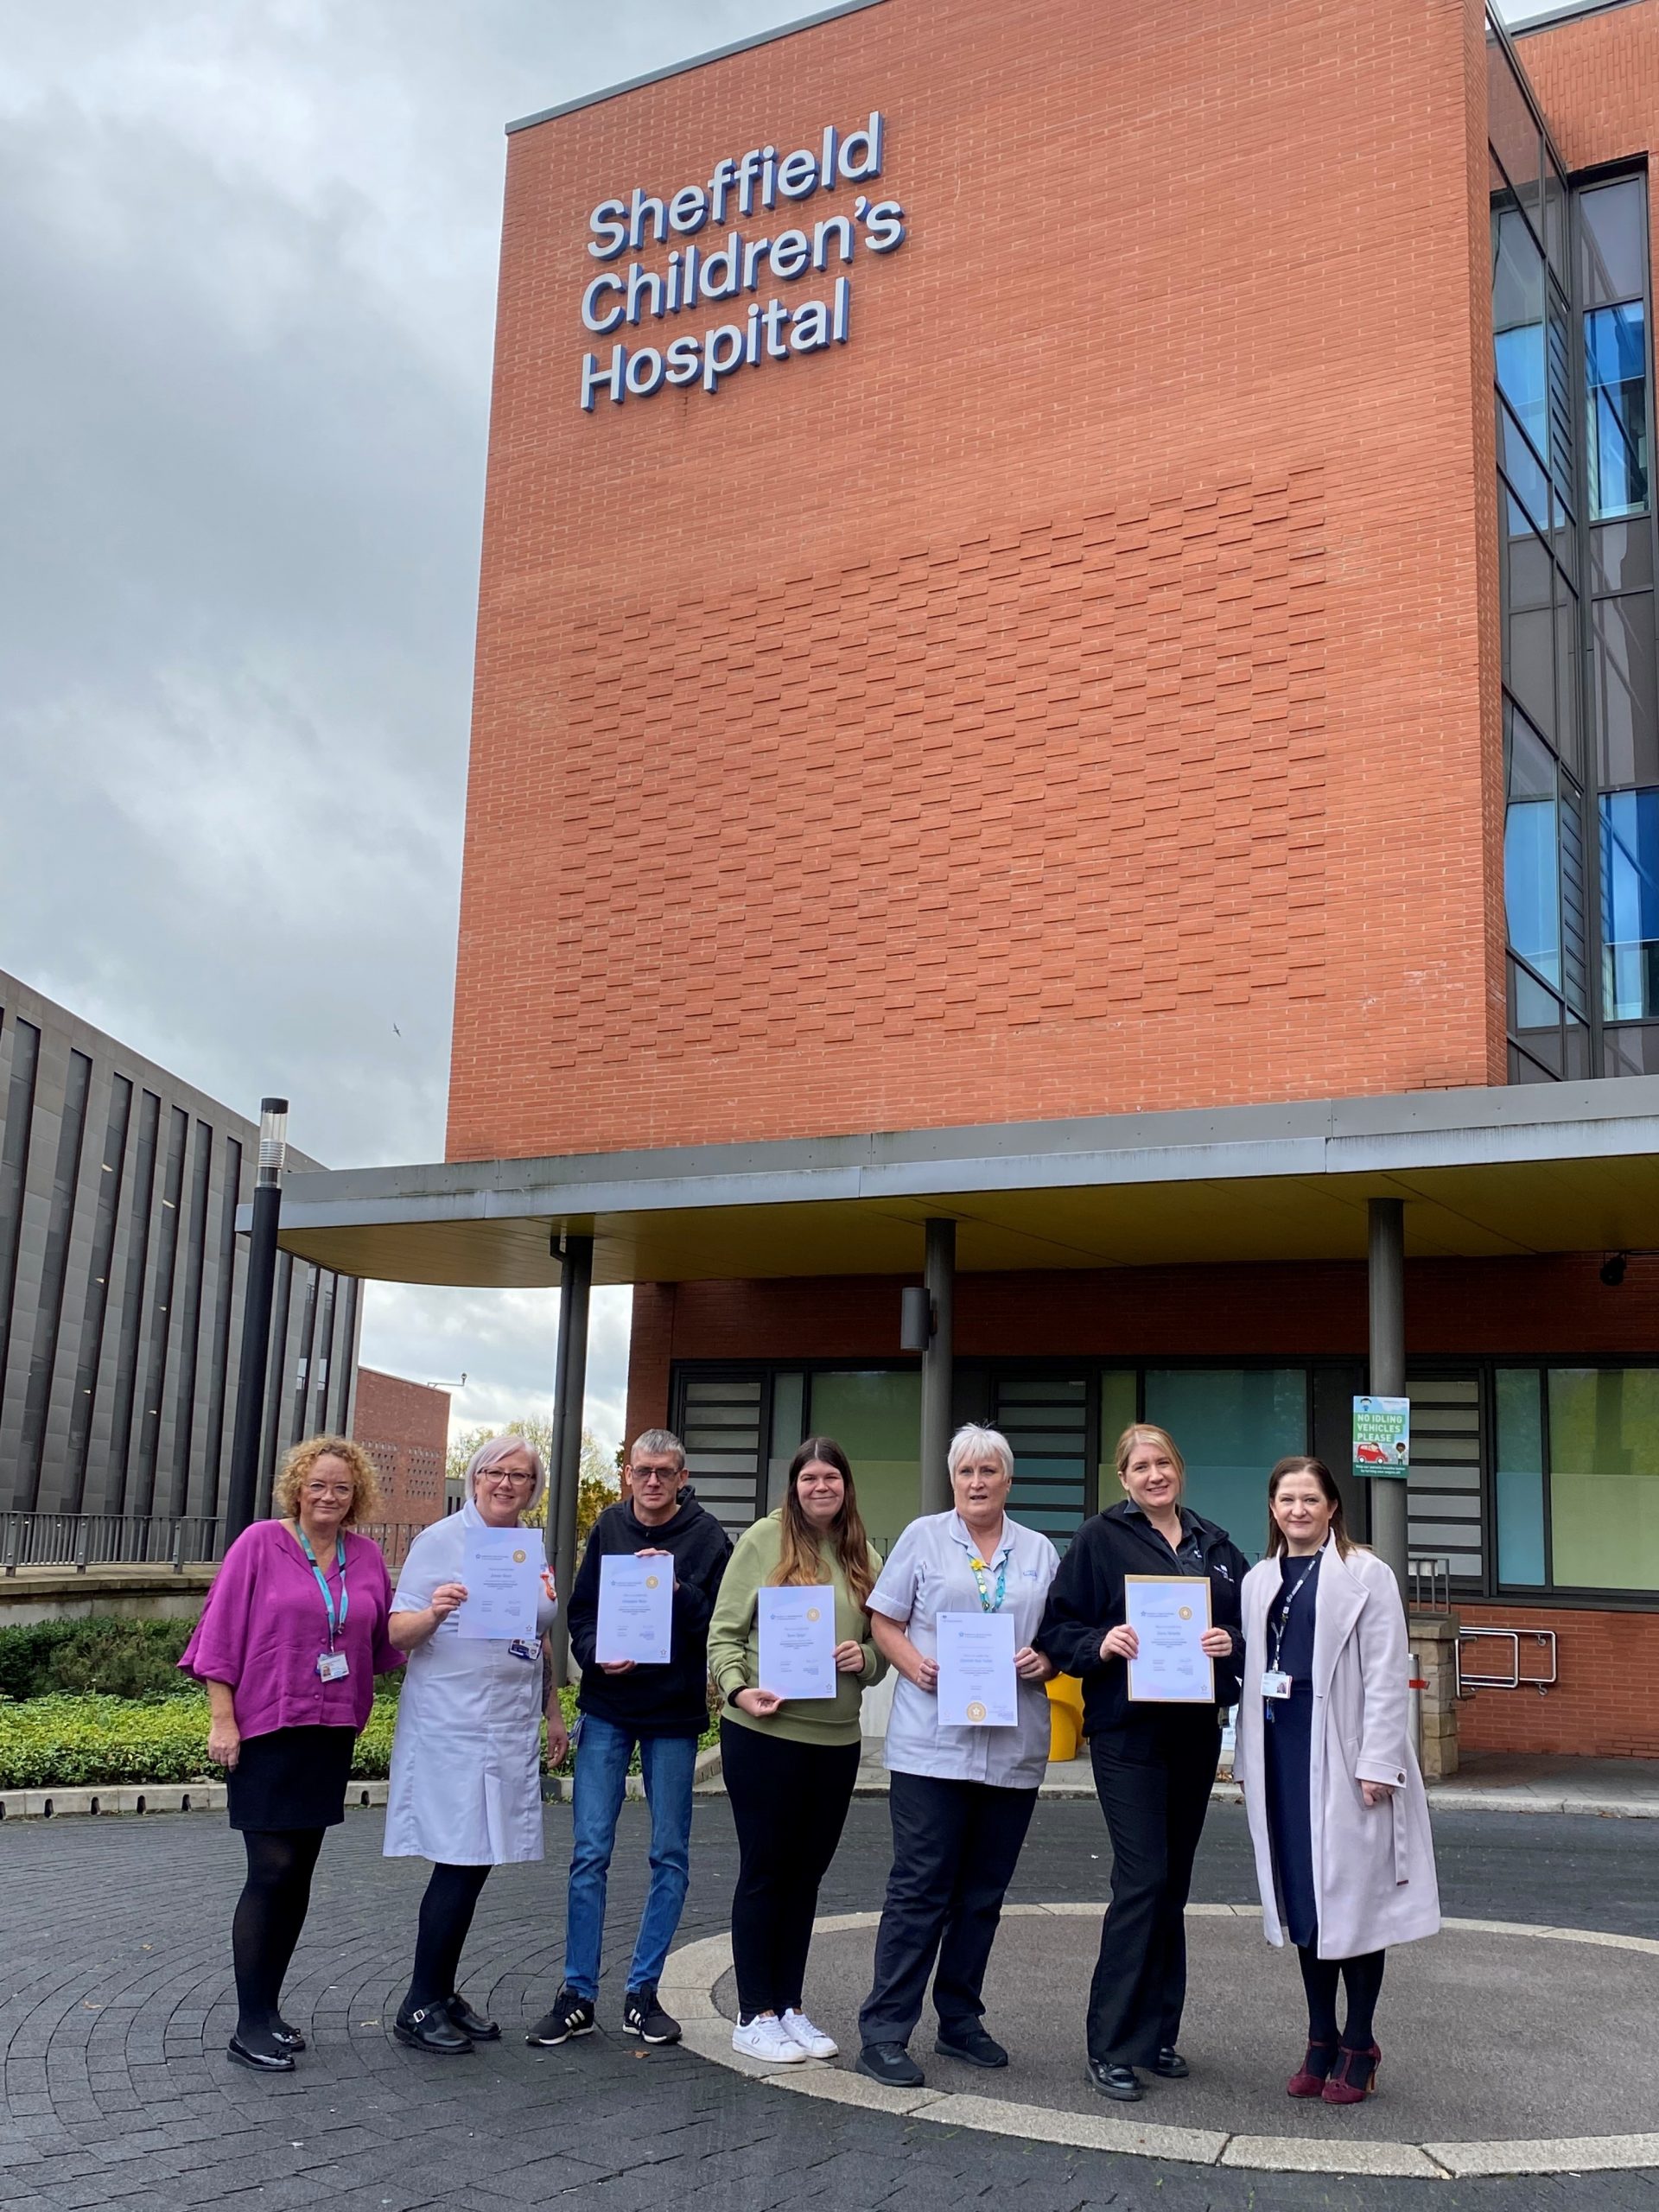 Former apprentices celebrate success and front-line roles at Sheffield Children’s Hospital